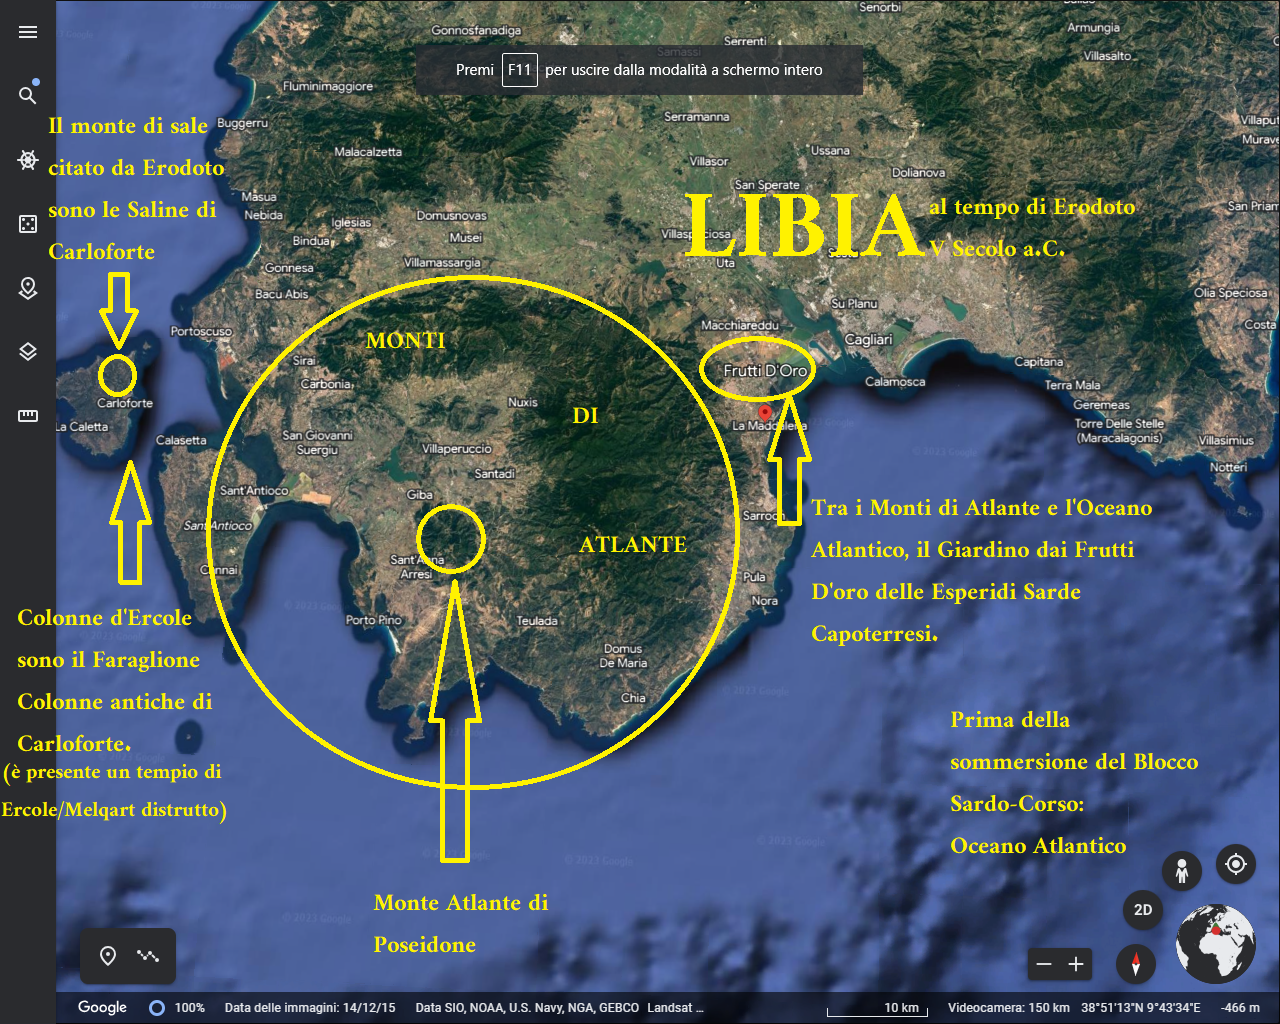 Up to now the cartography of Herodothean Libya has been wrong: Libya is the province of Cagliari